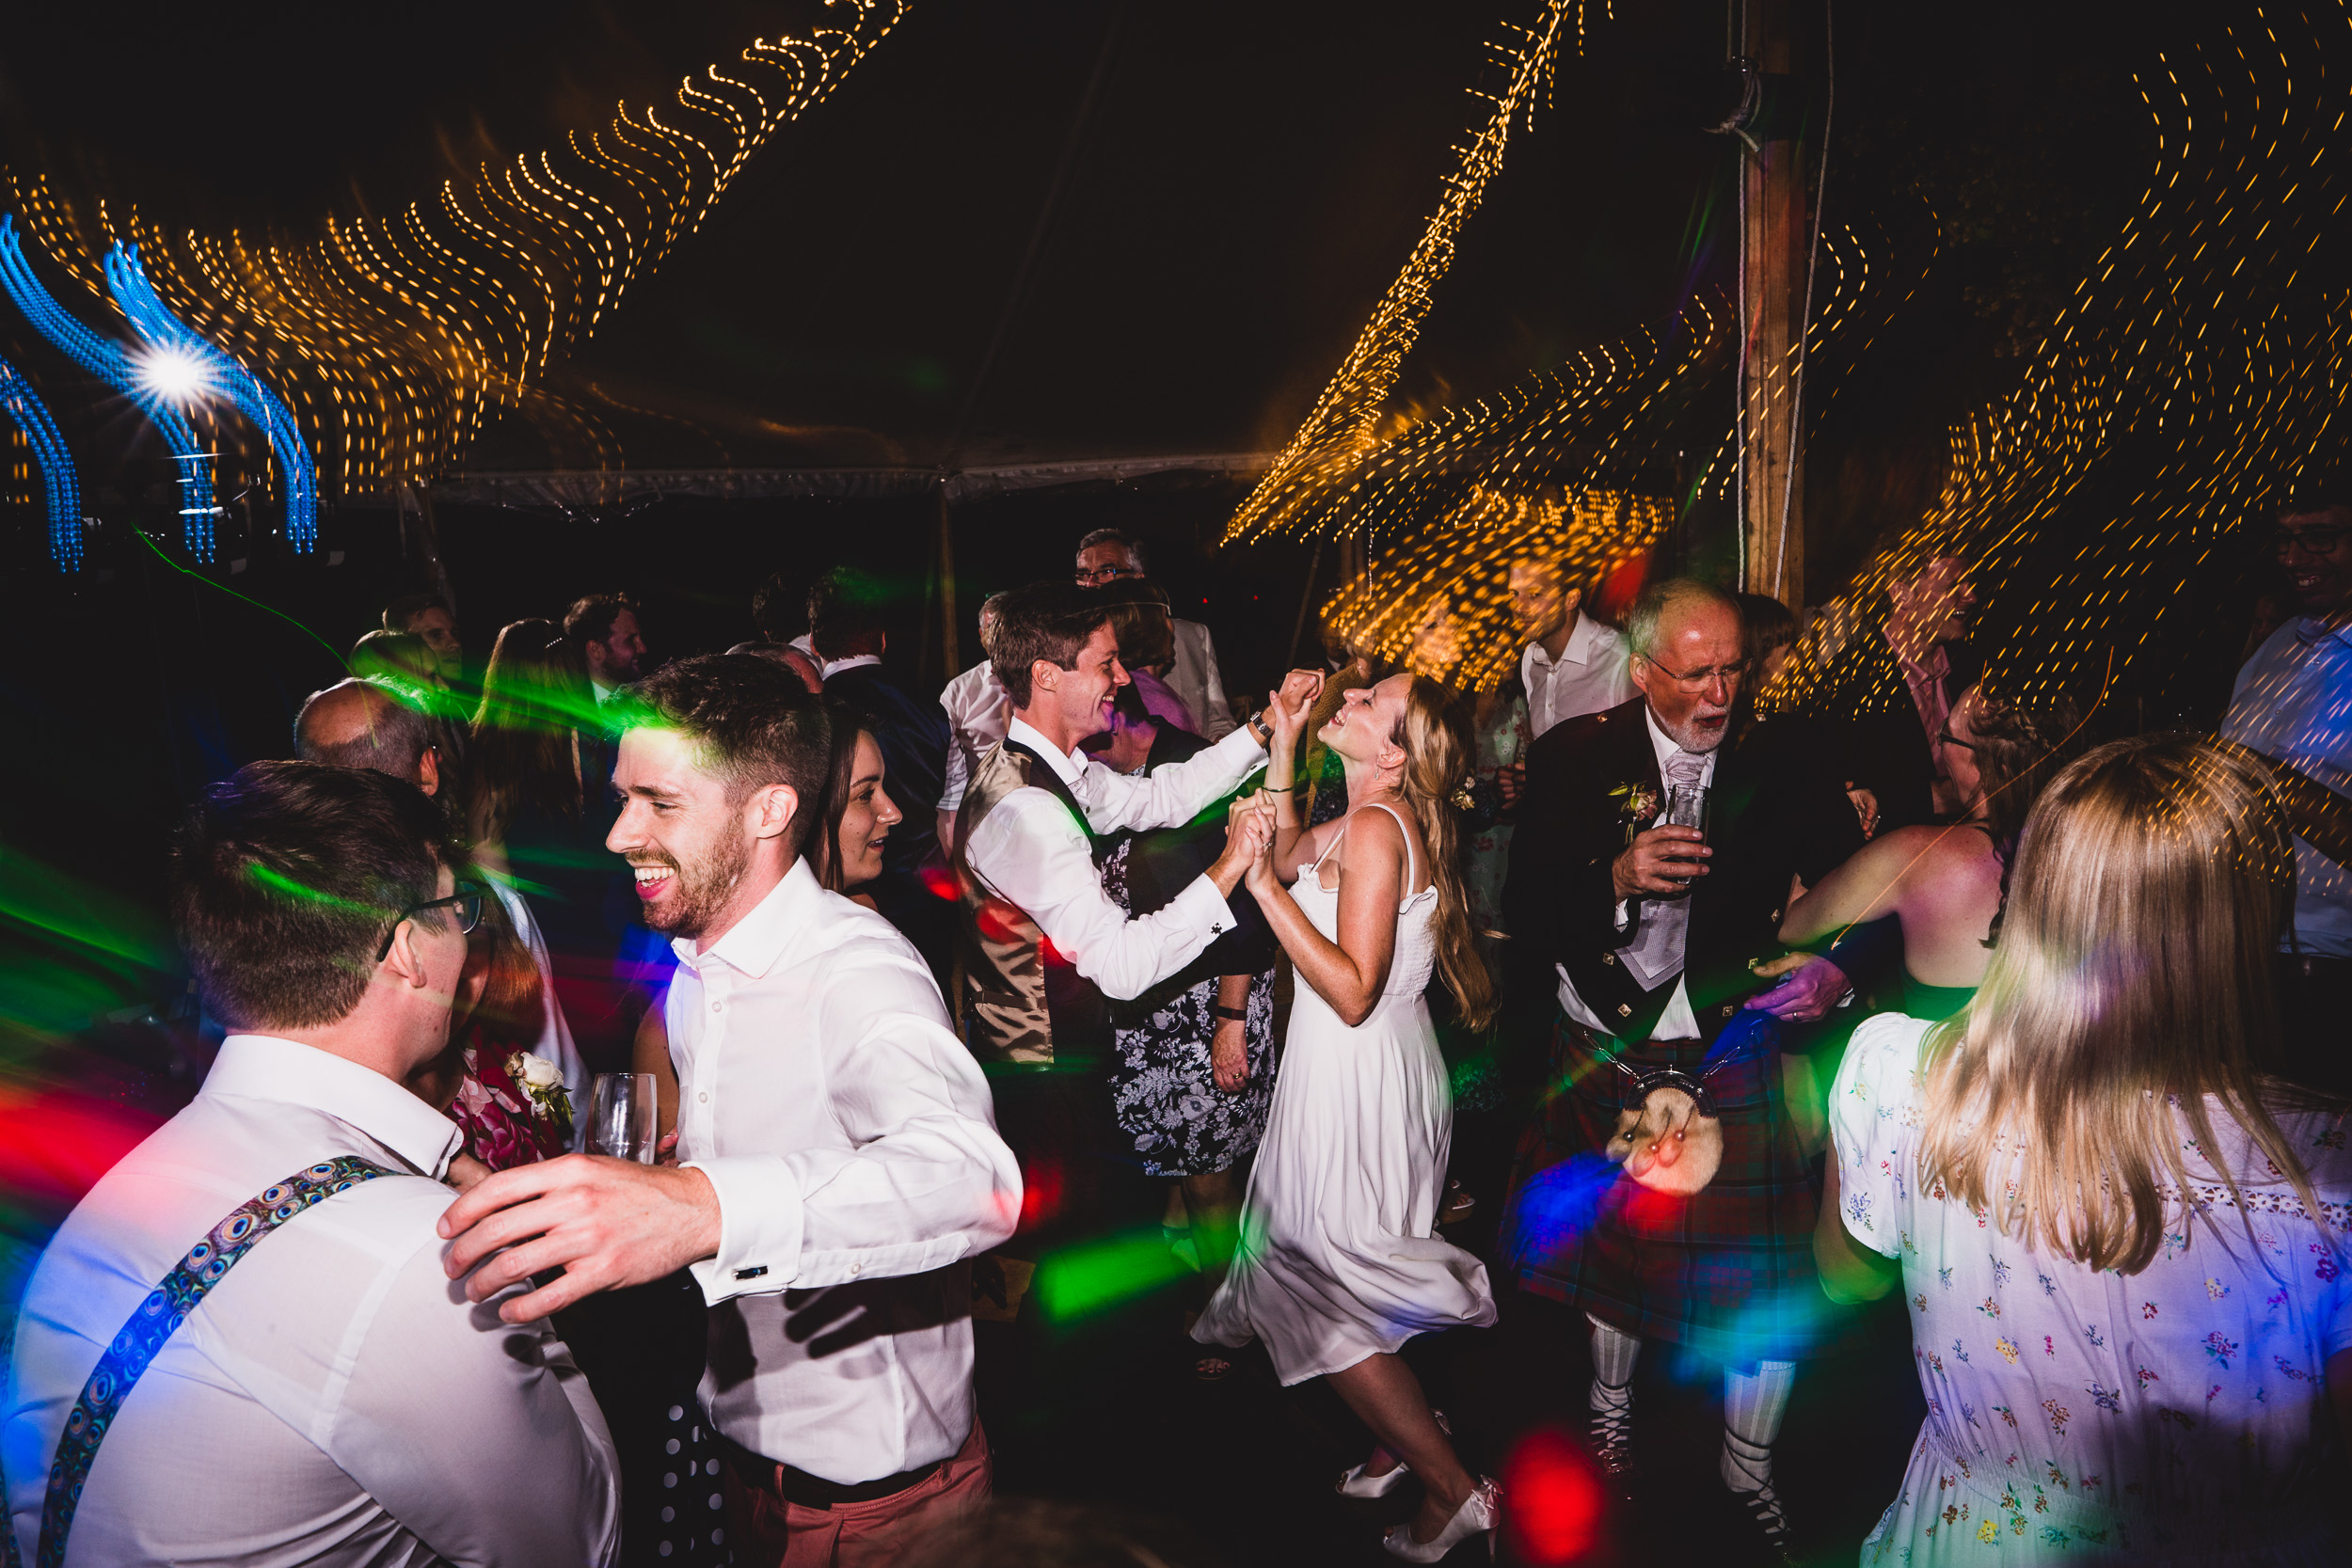 A bride and her wedding party dancing at a reception in a tent.